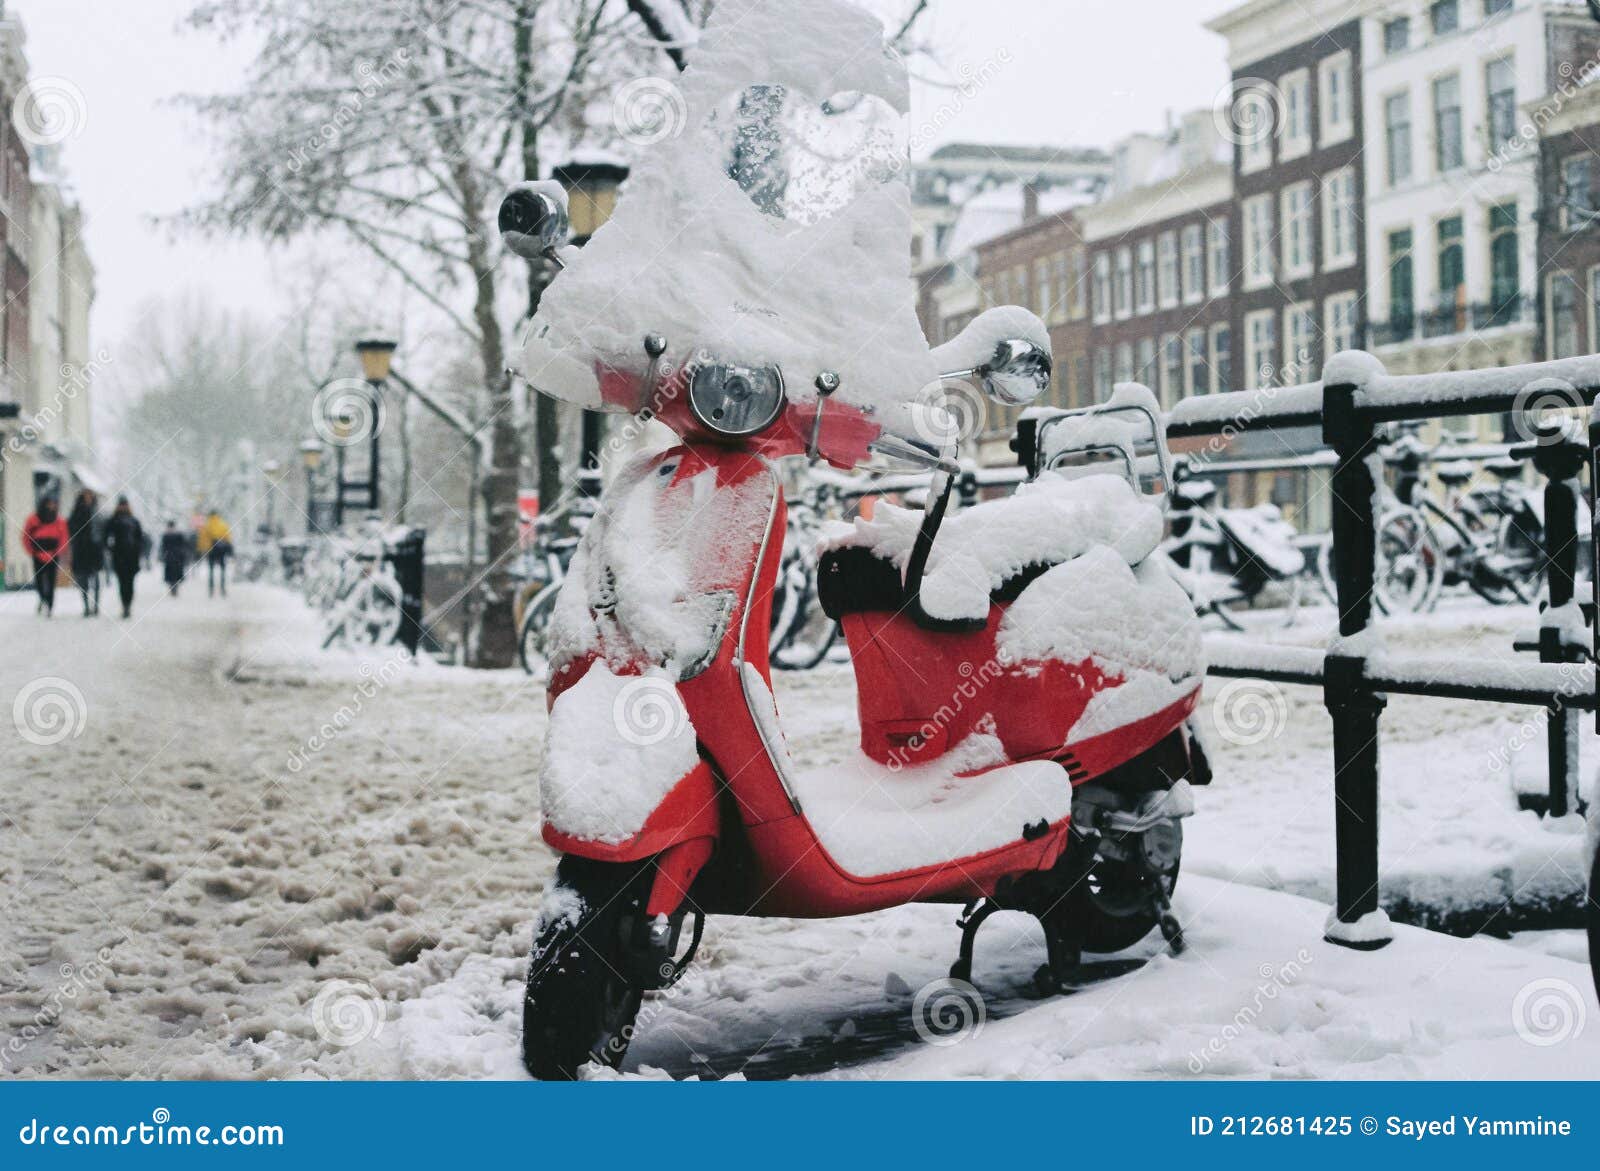 film photo of red scooter with a loveheart covered in snow in the netherlands